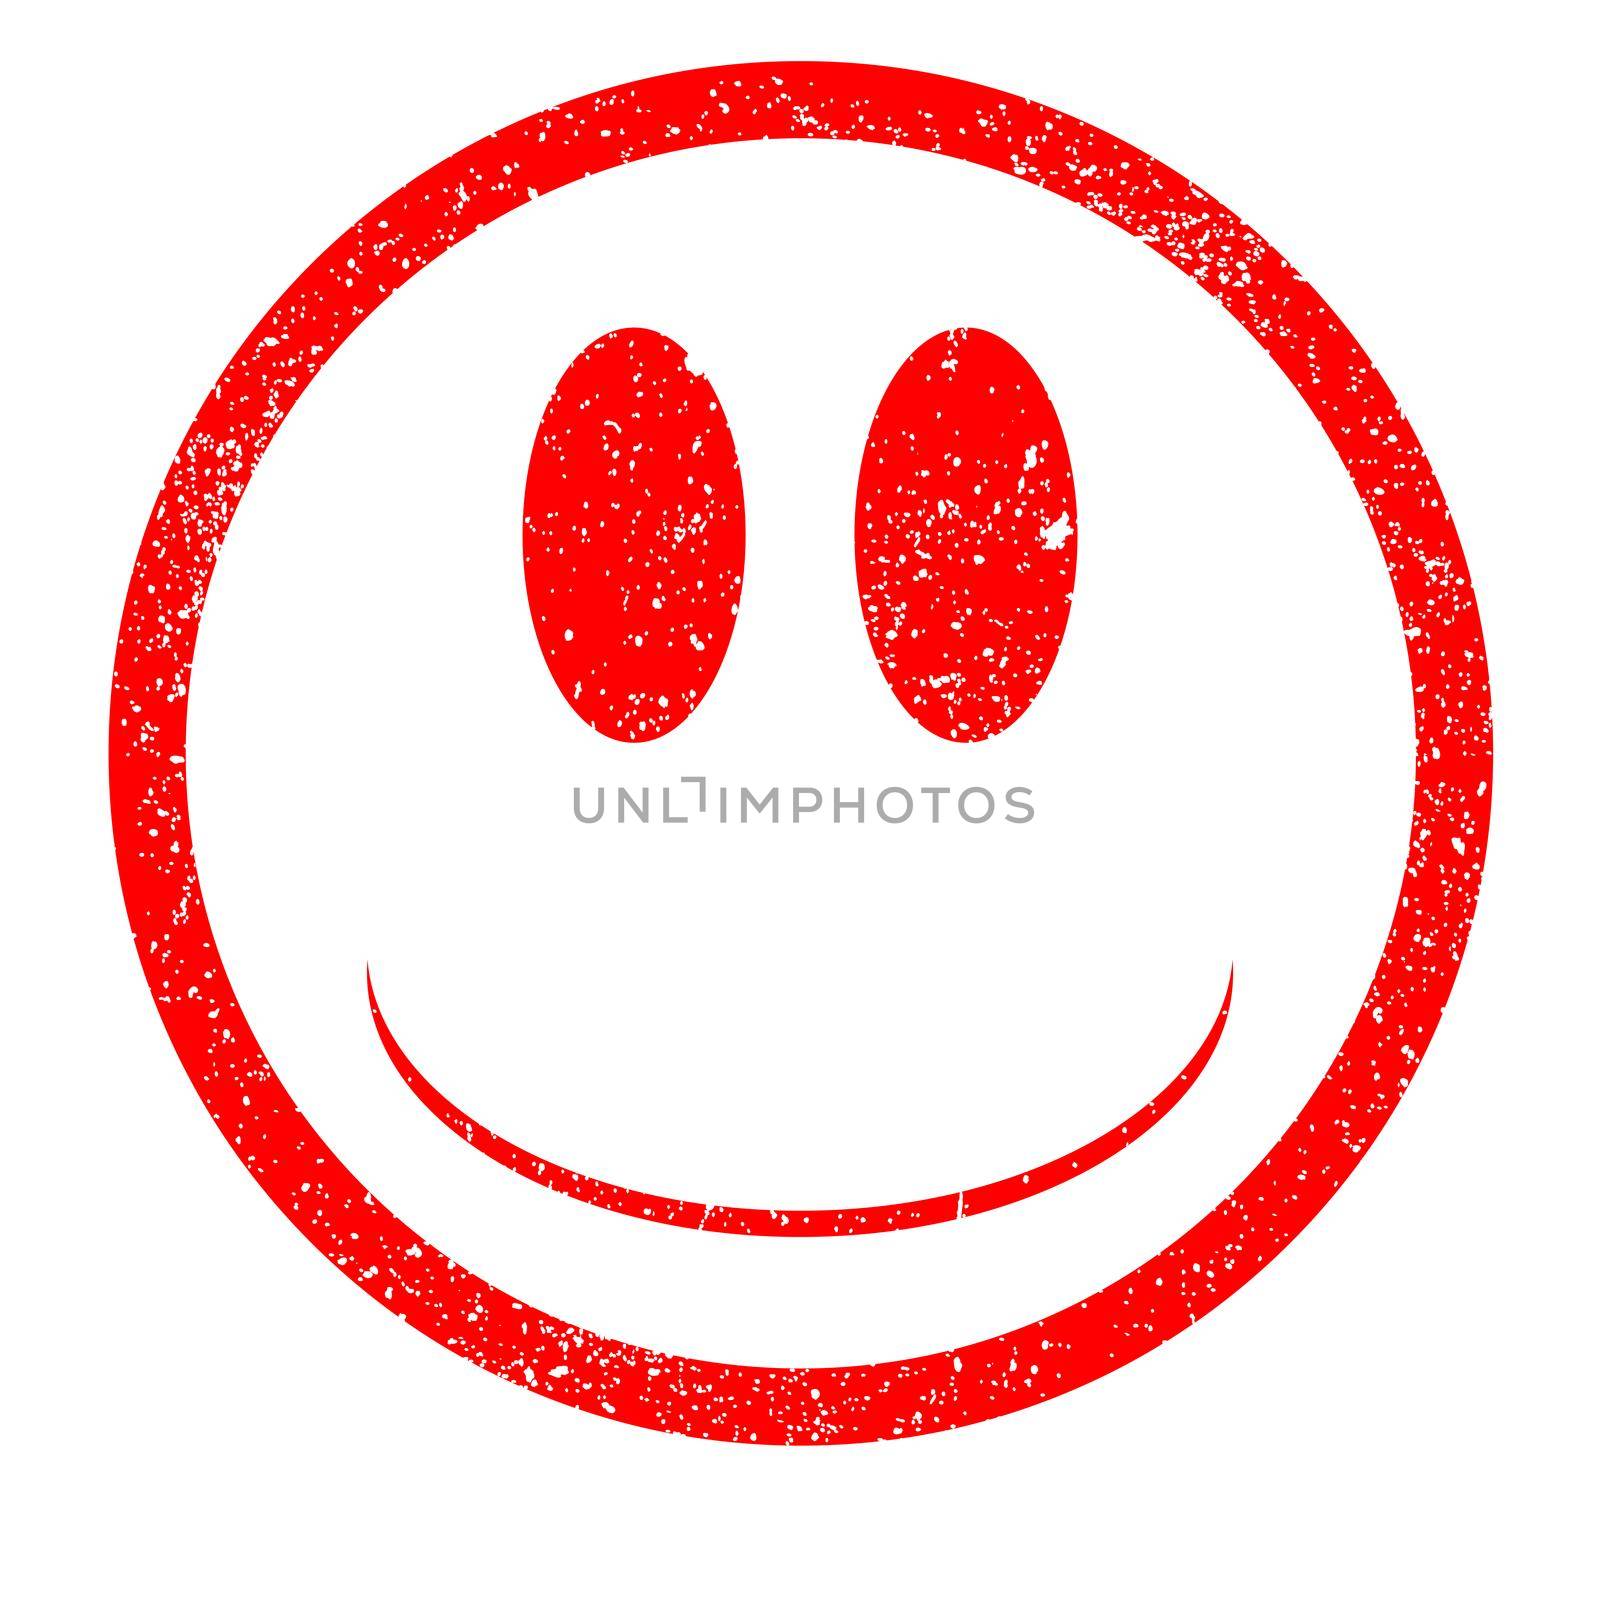 A rubber ink stamp with emoji smily facein red all with grunge effect over white